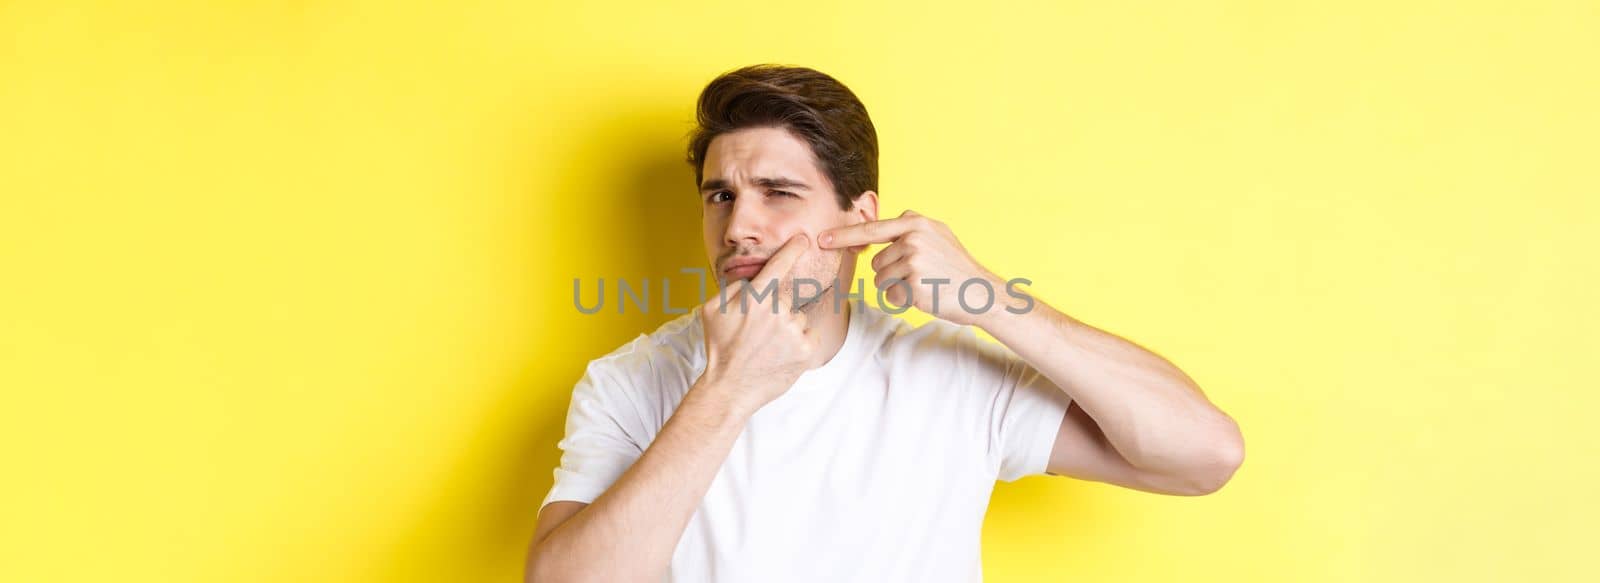 Young man pop a pimple on cheek, standing over yellow background. Concept of skin care and acne by Benzoix